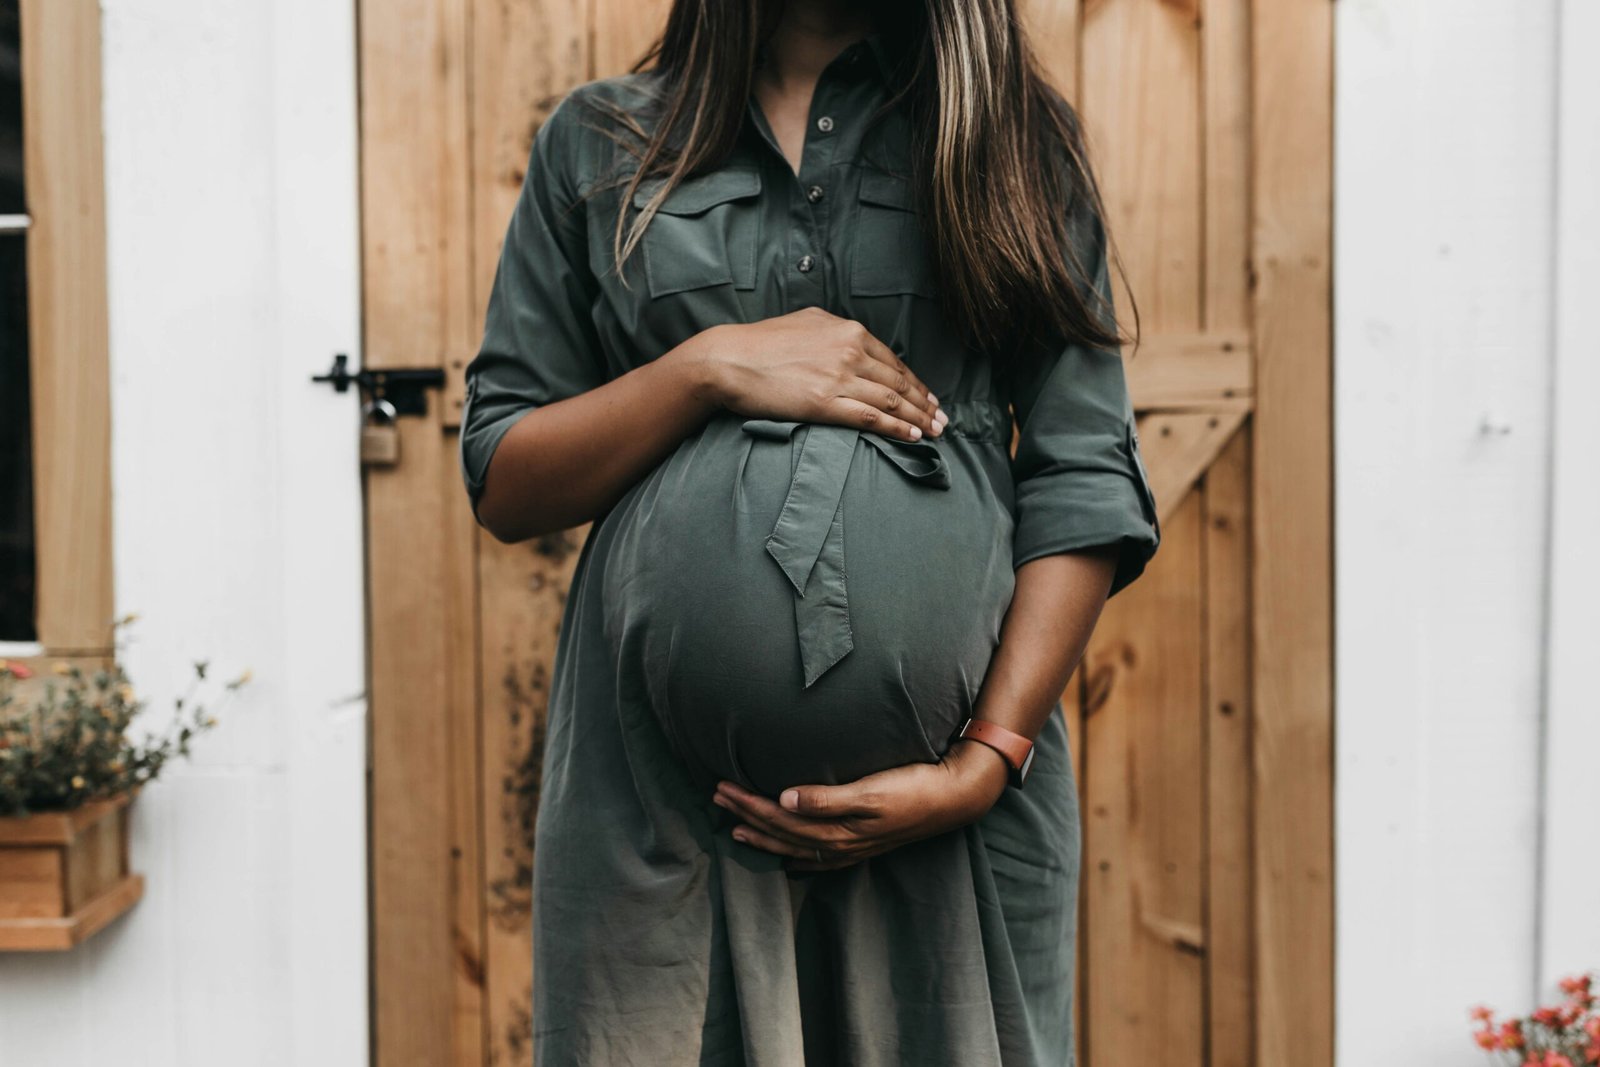 explore pregnancy cravings and how to manage them with helpful tips and advice. understanding common pregnancy cravings and finding healthy alternatives.